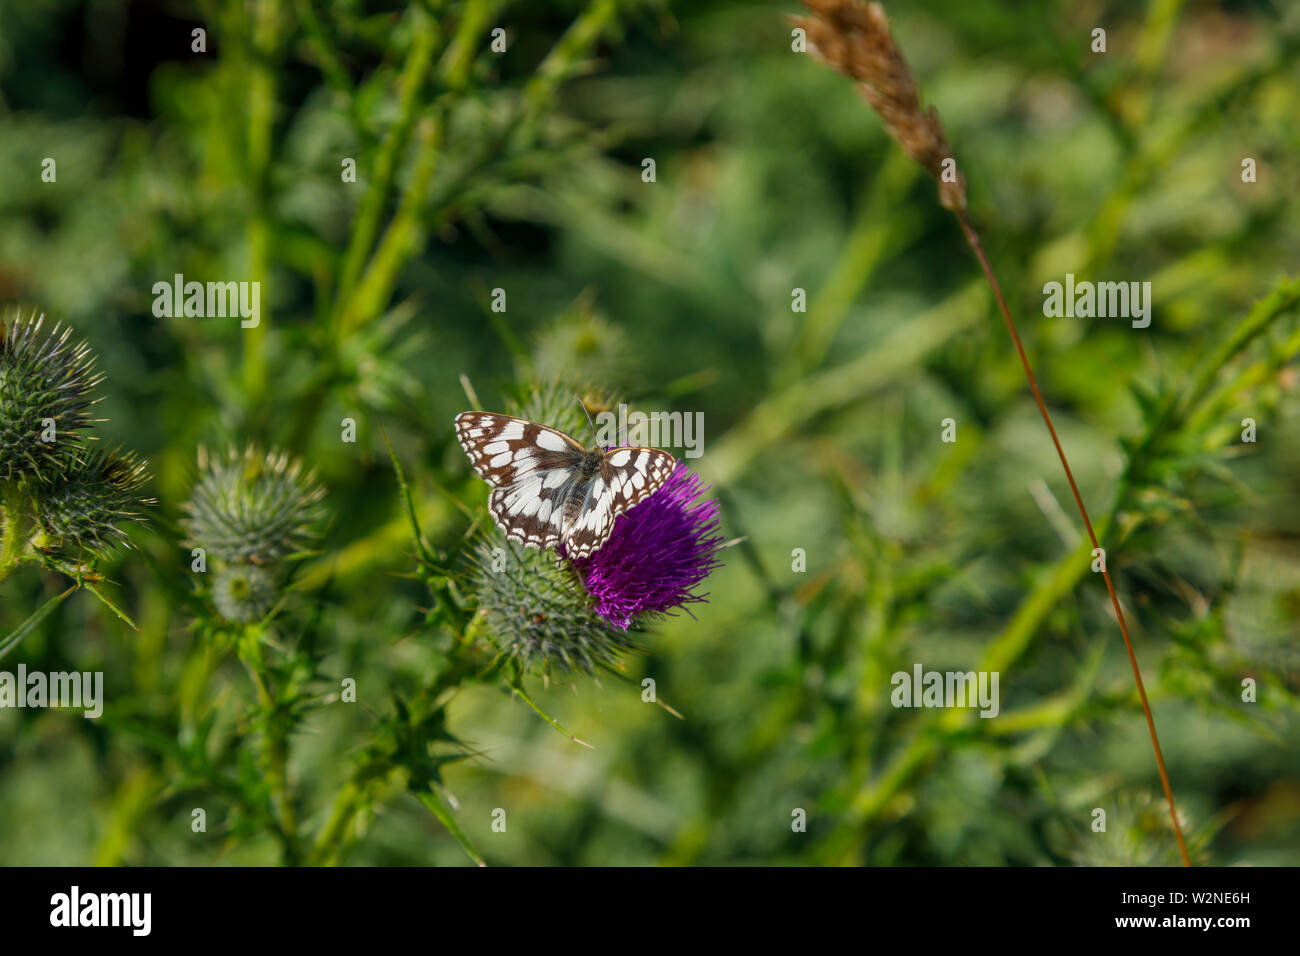 Dorsal view of female Melanargia galathea, the marbled white butterfly, family Nymphalidae, on a purple milk thistle flower head in Surrey, SE England Stock Photo